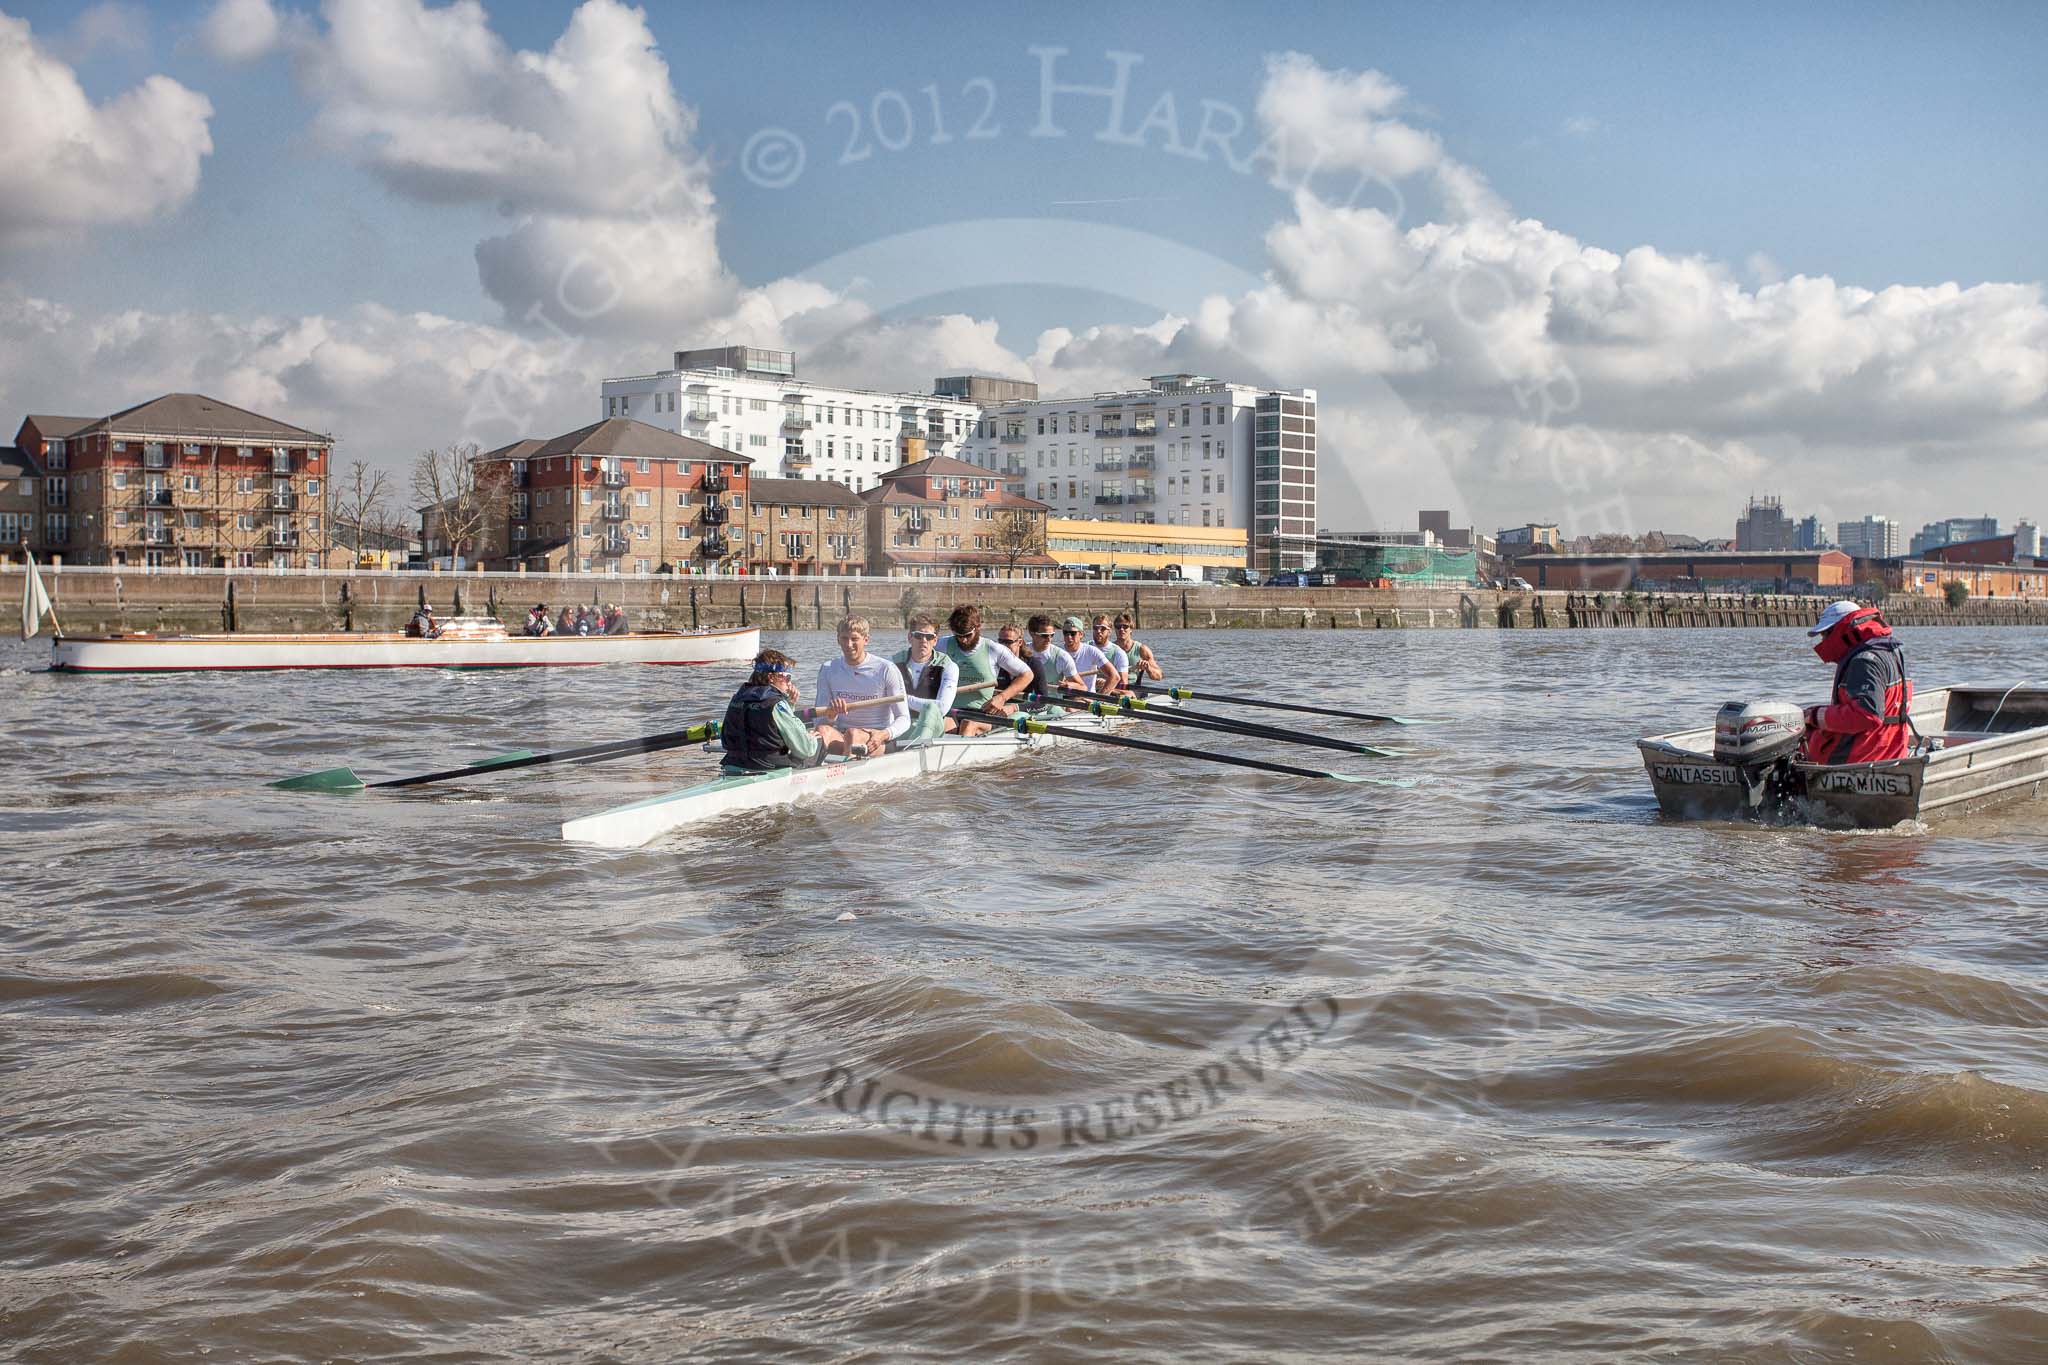 The Boat Race season 2012 - Tideway Week (Tuesday).




on 03 April 2012 at 10:40, image #53